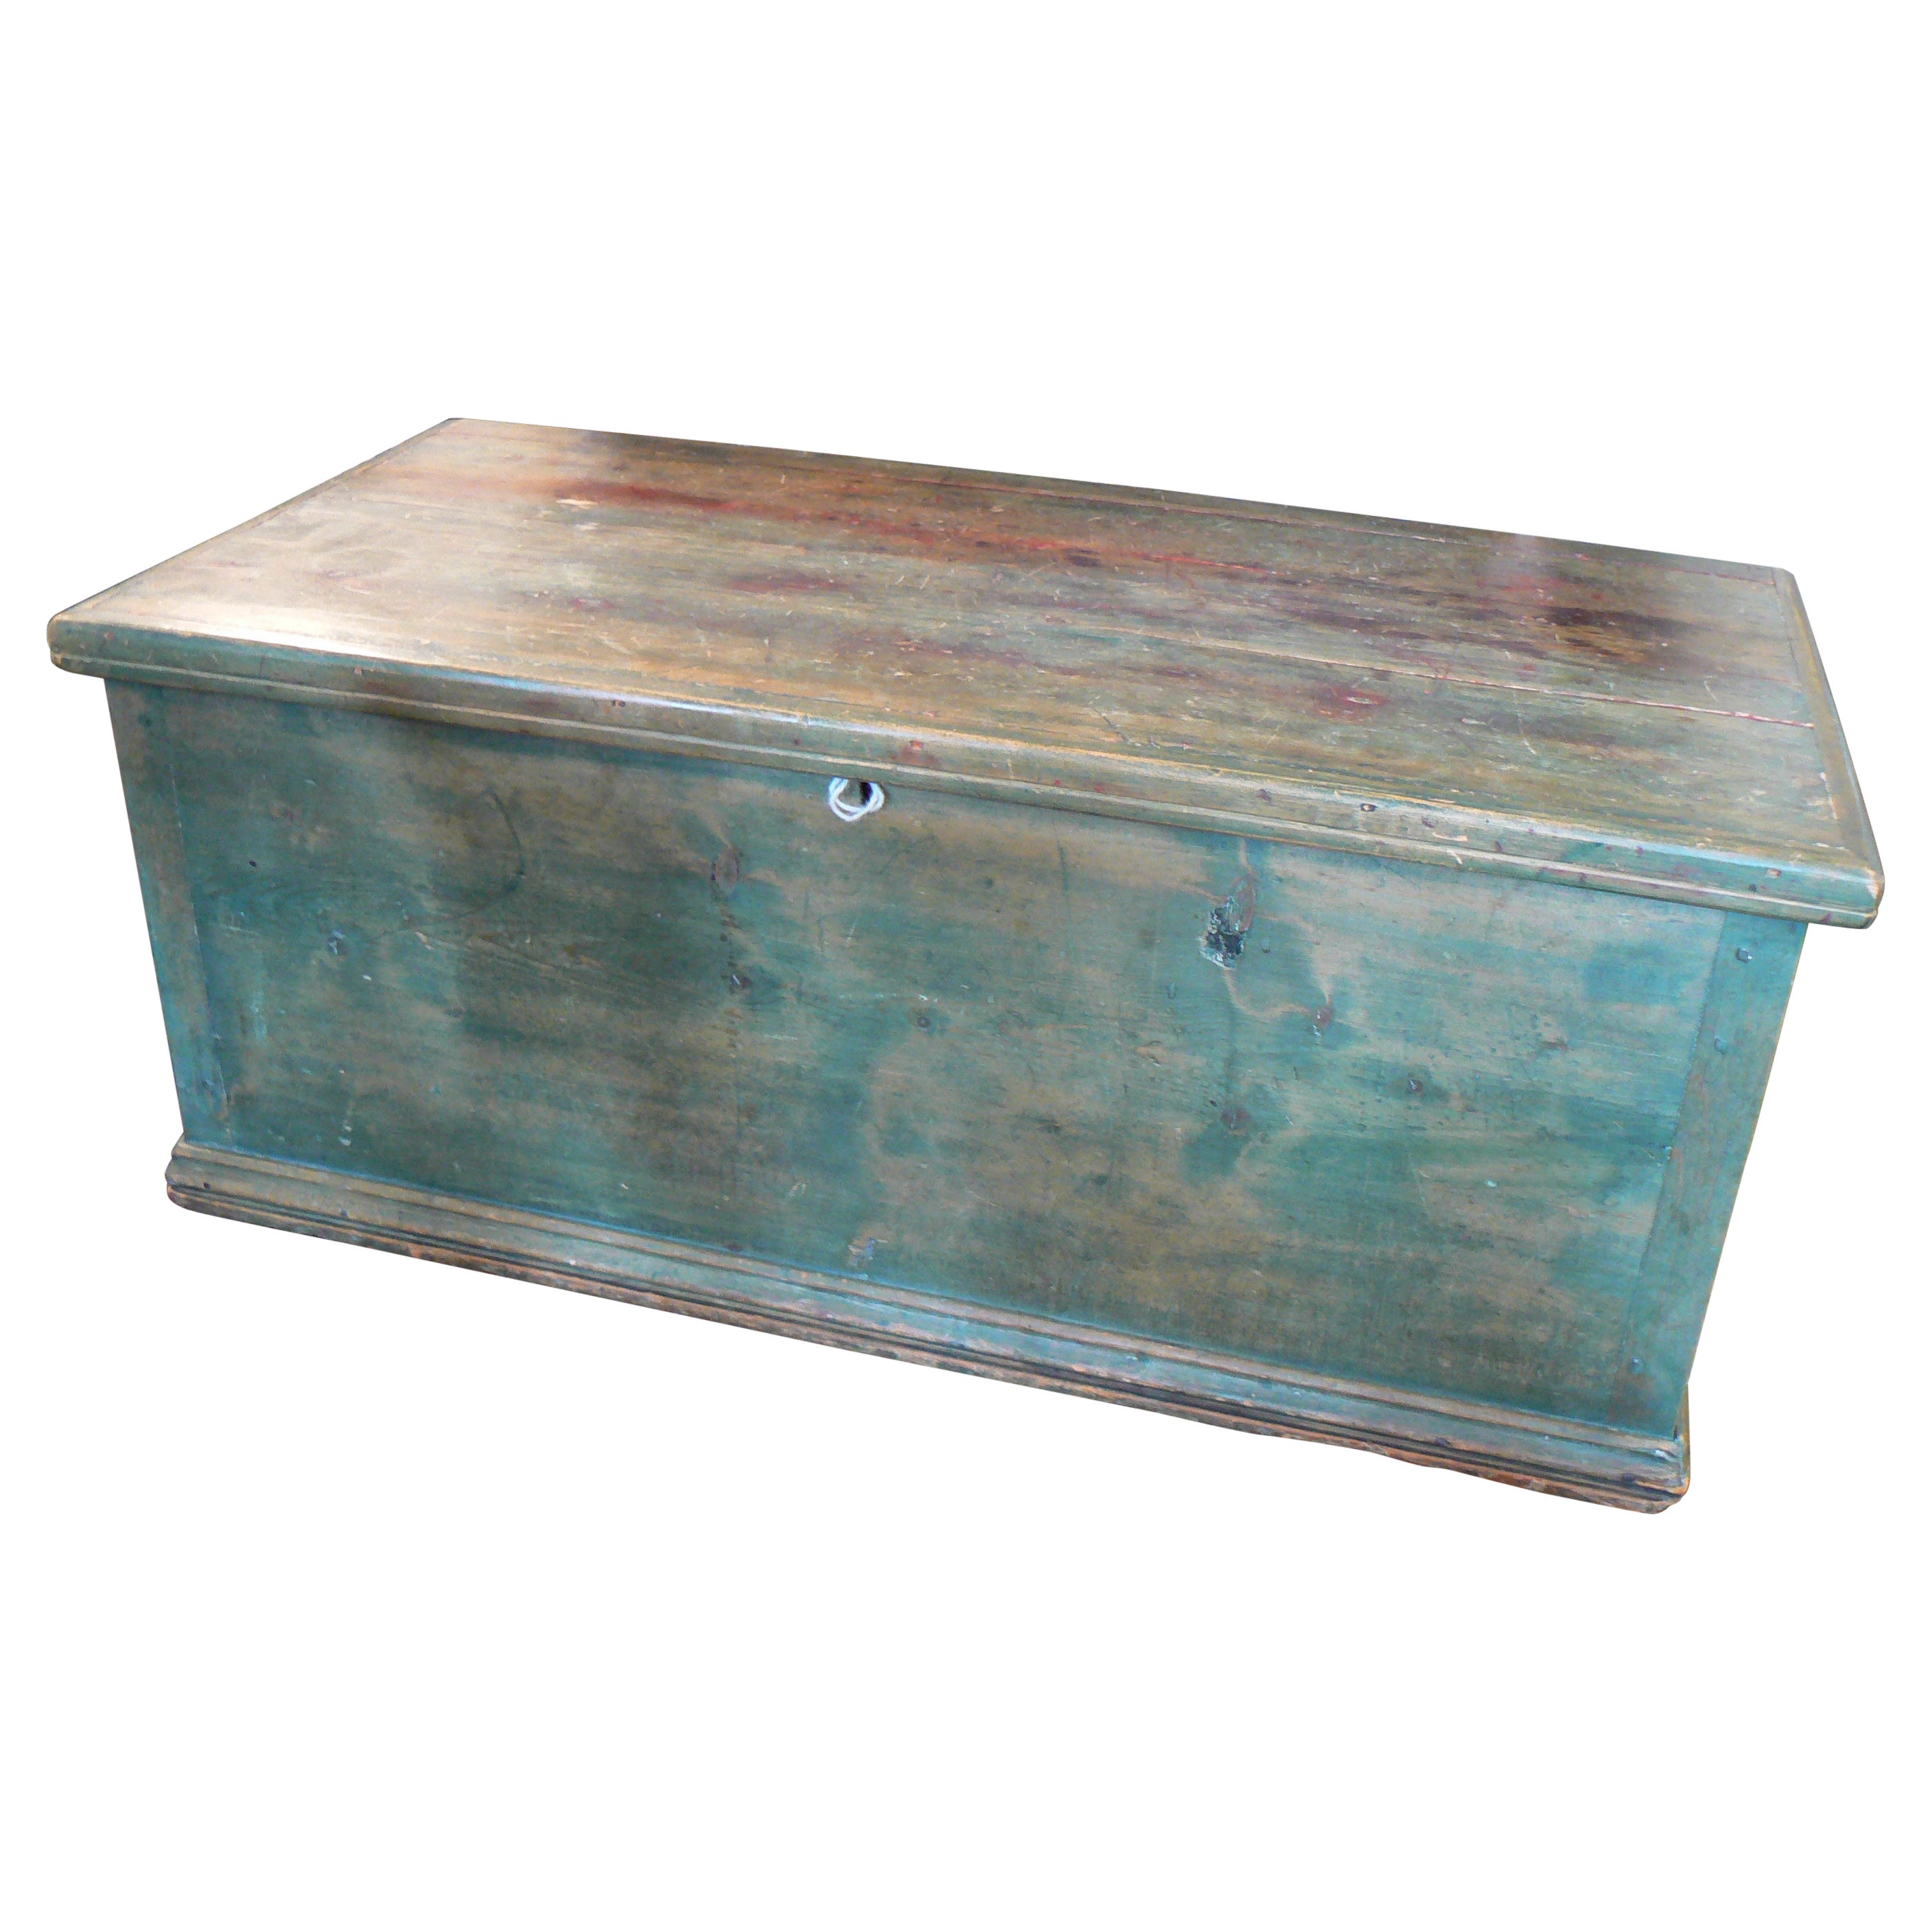 19th Century Blanket Chest in Old Green Paint